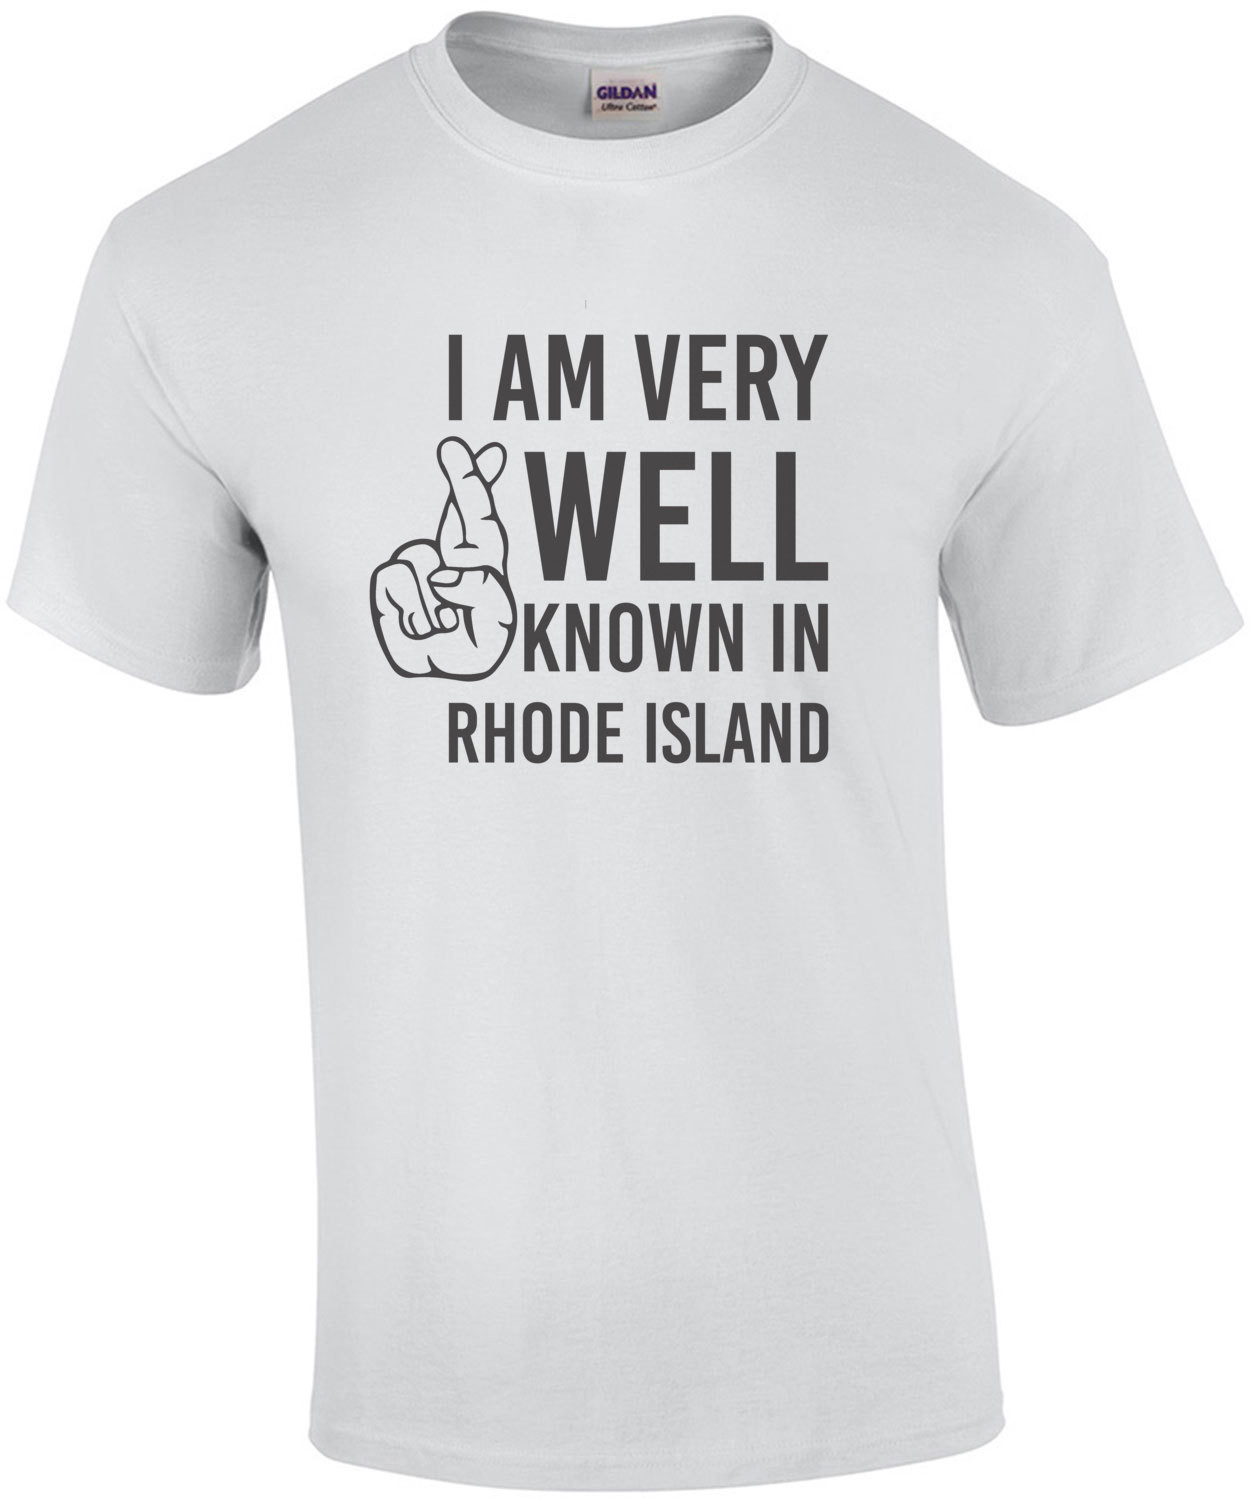 I am very well known in Rhode Island T-Shirt